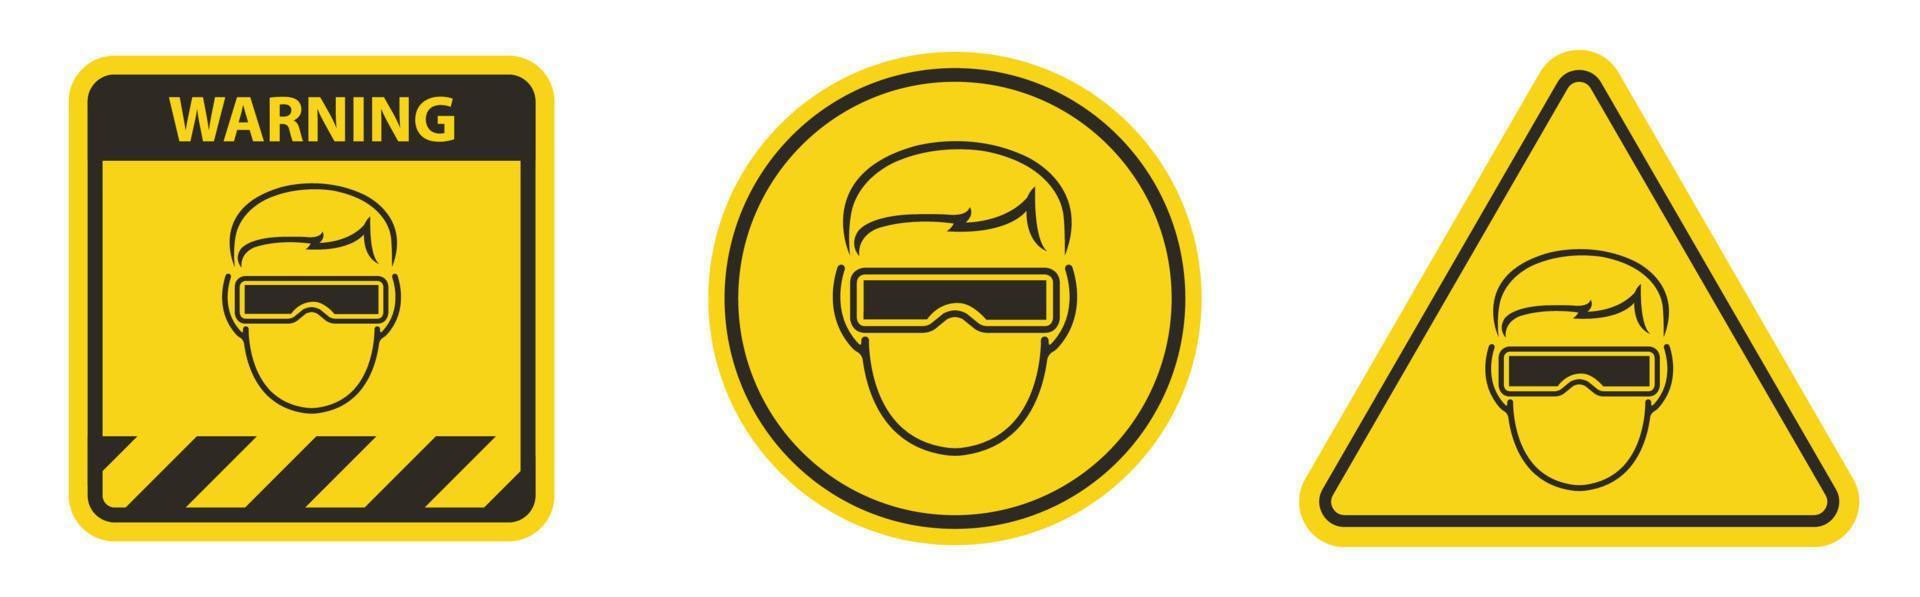 Symbol wear goggles Sign Isolate On White Background,Vector Illustration EPS.10 vector